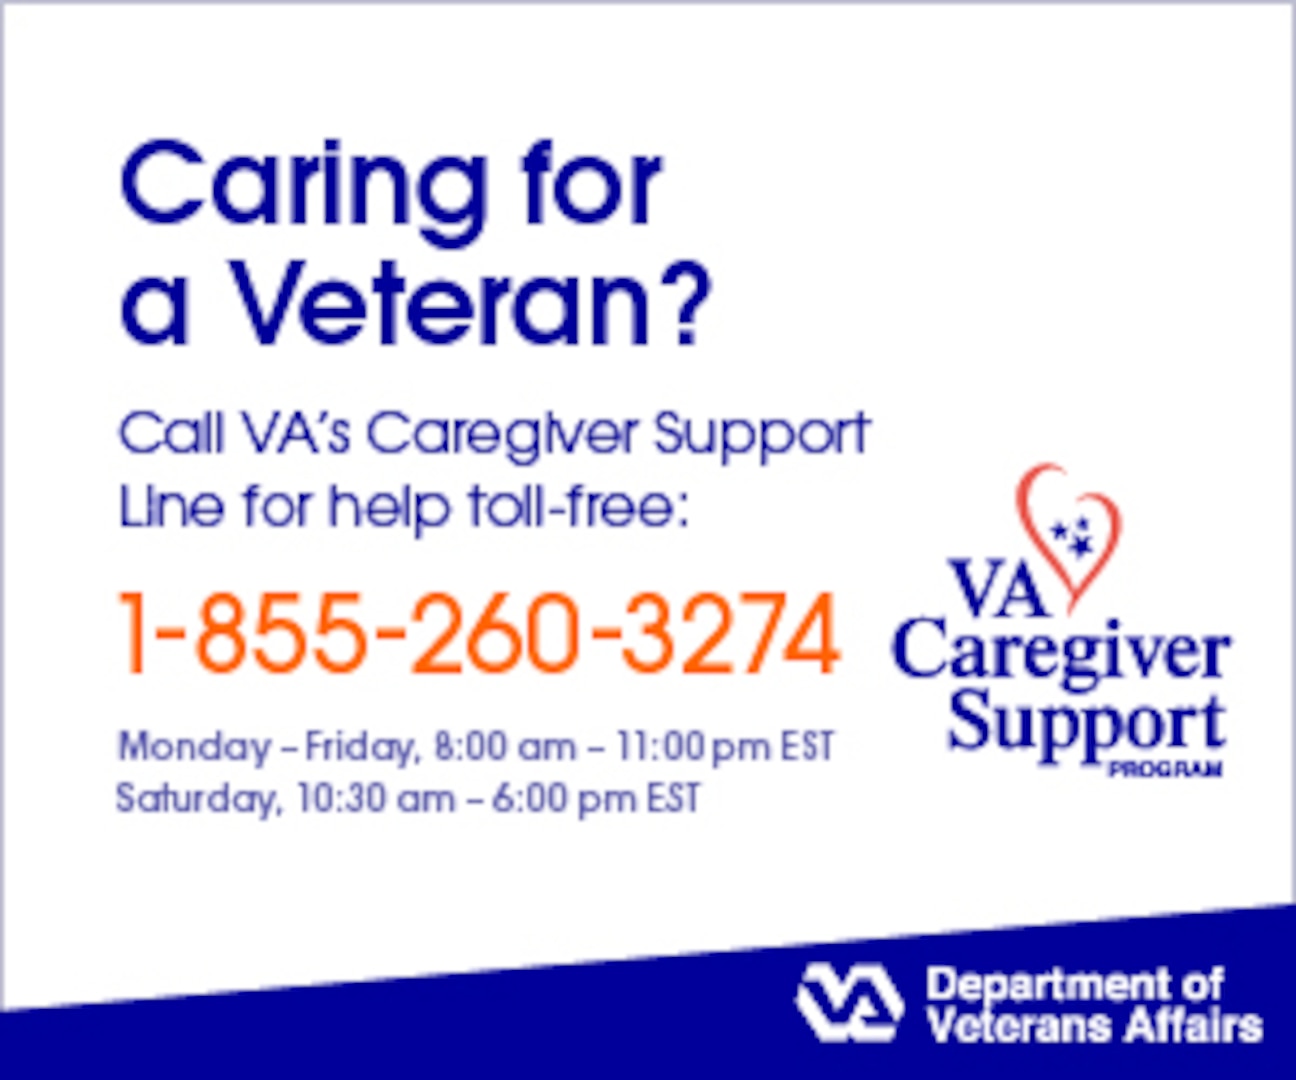 Caring for a Veteran add.